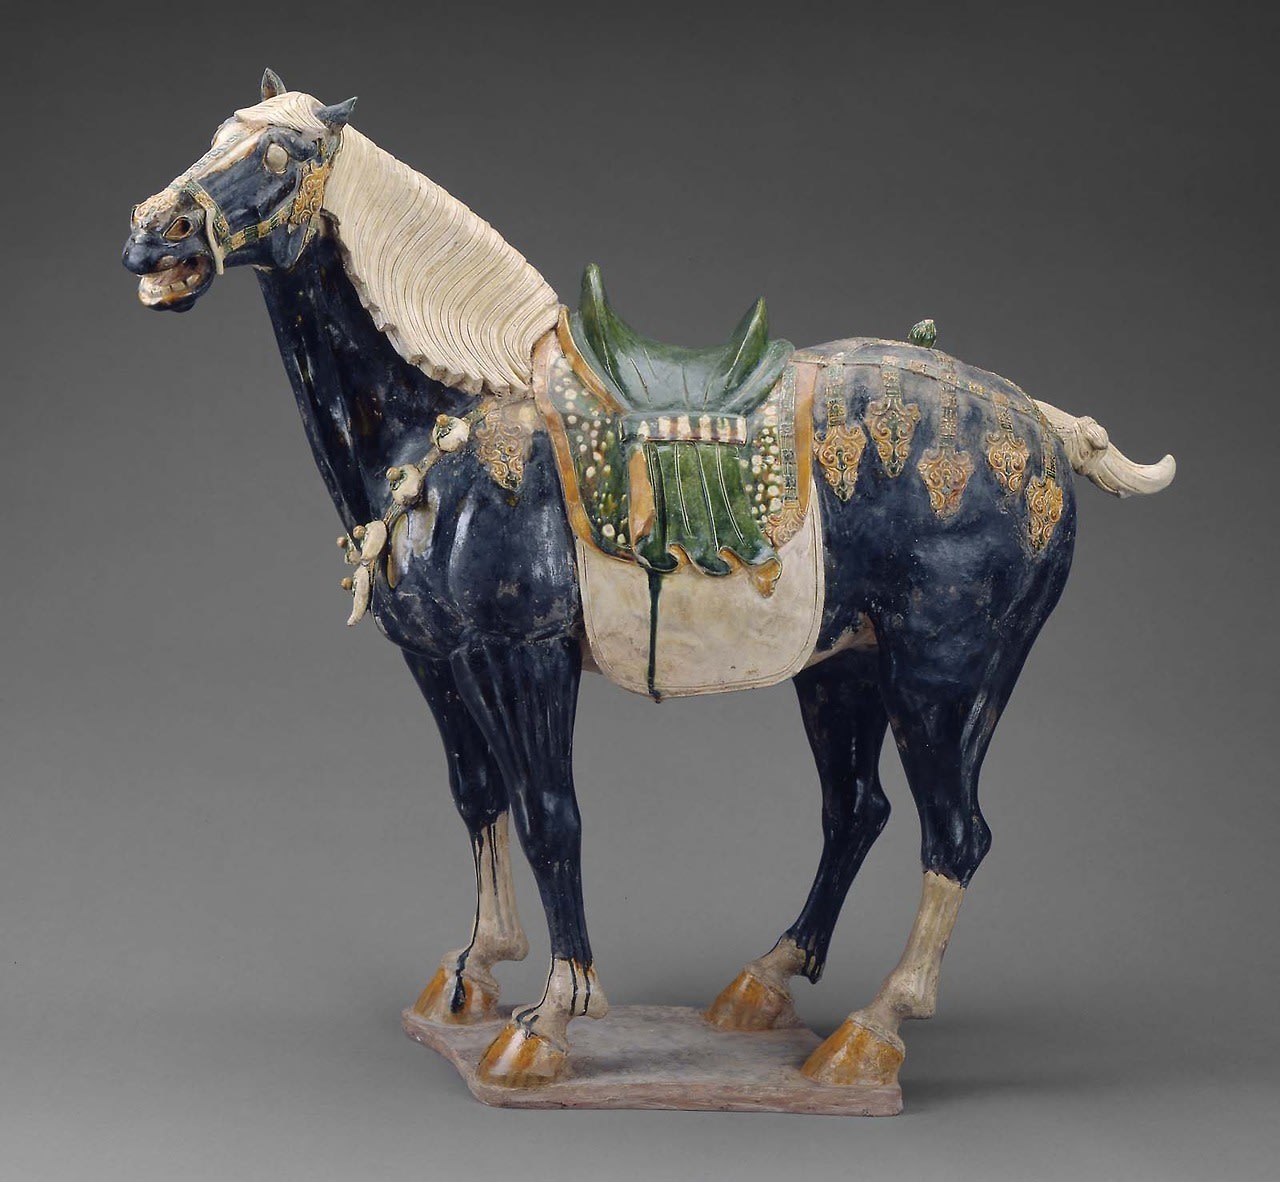 A Chinese ceramic horse, glazed, with applied motifs. Tang Dynasty, from the early 8th century. Detail pic in comment. Museum of Fine Art.